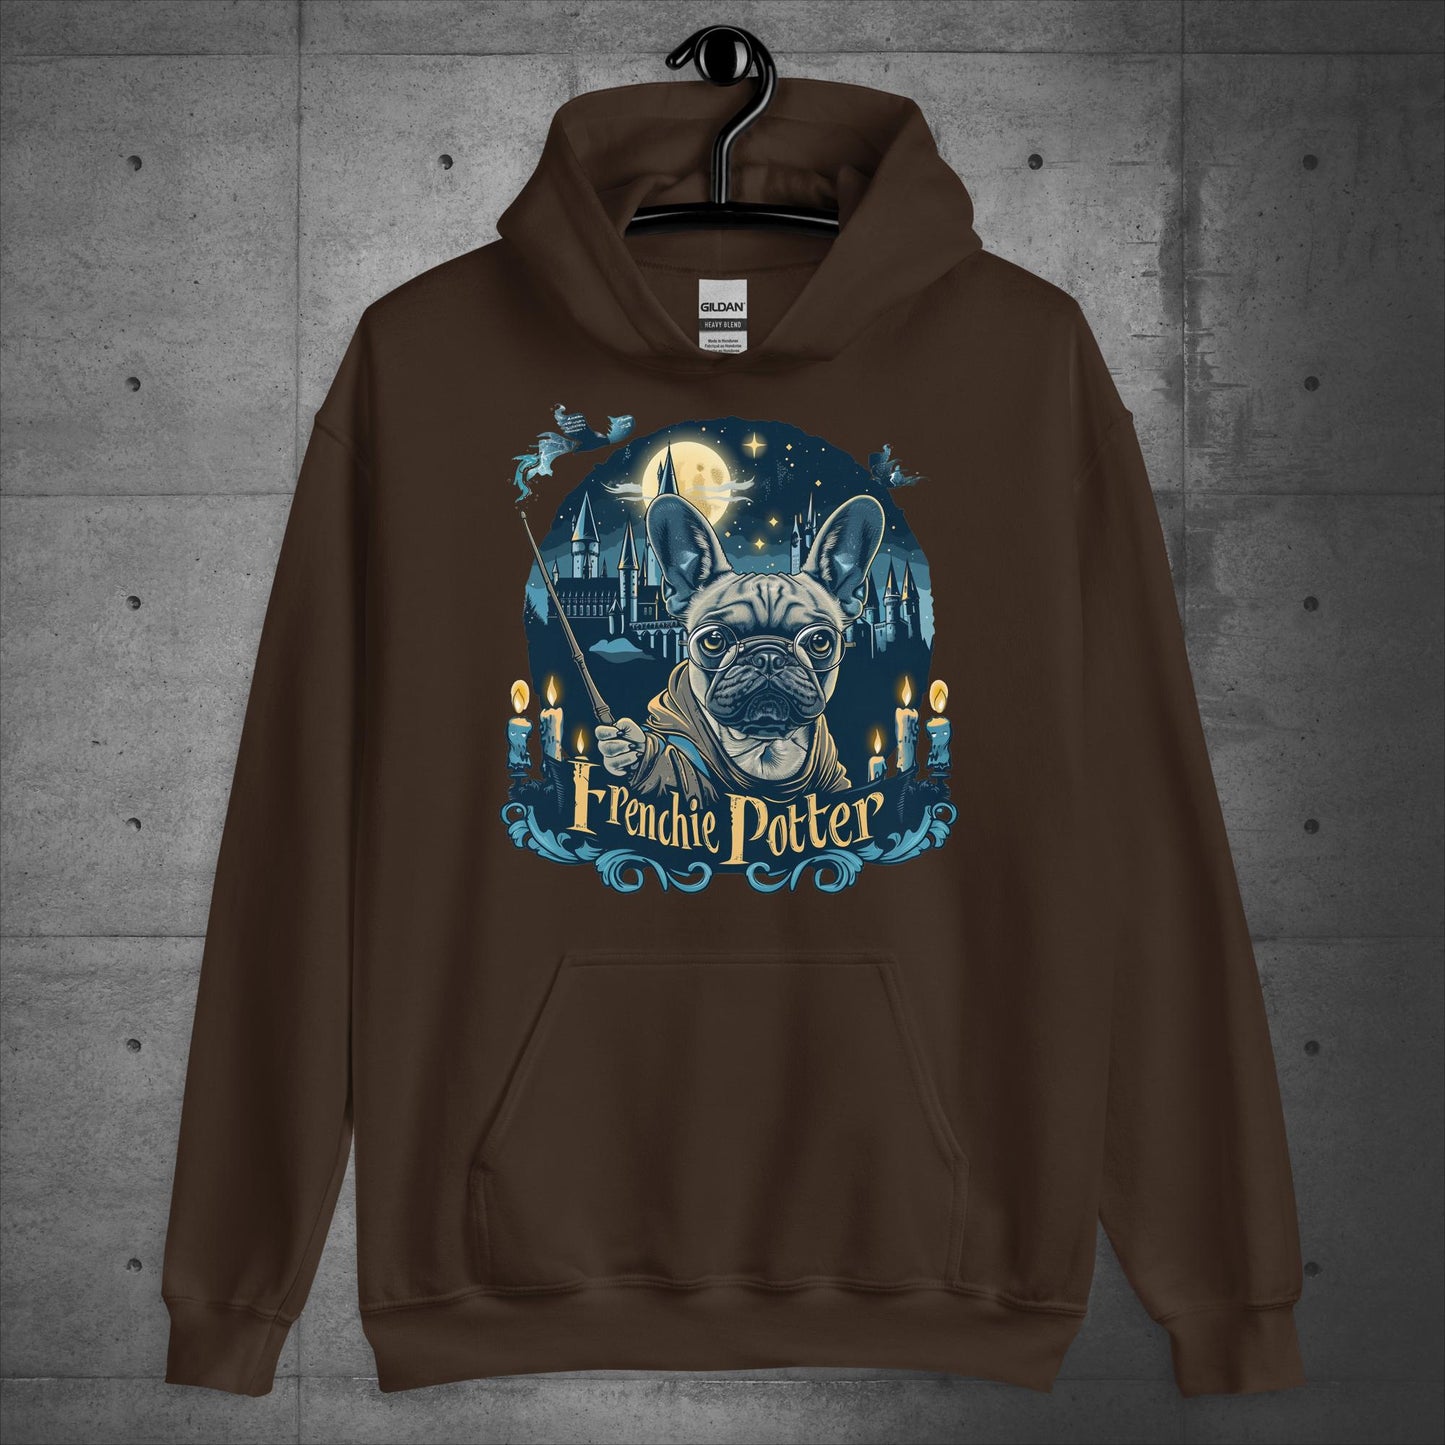 Unisex "Frenchie Potter" Hoodie